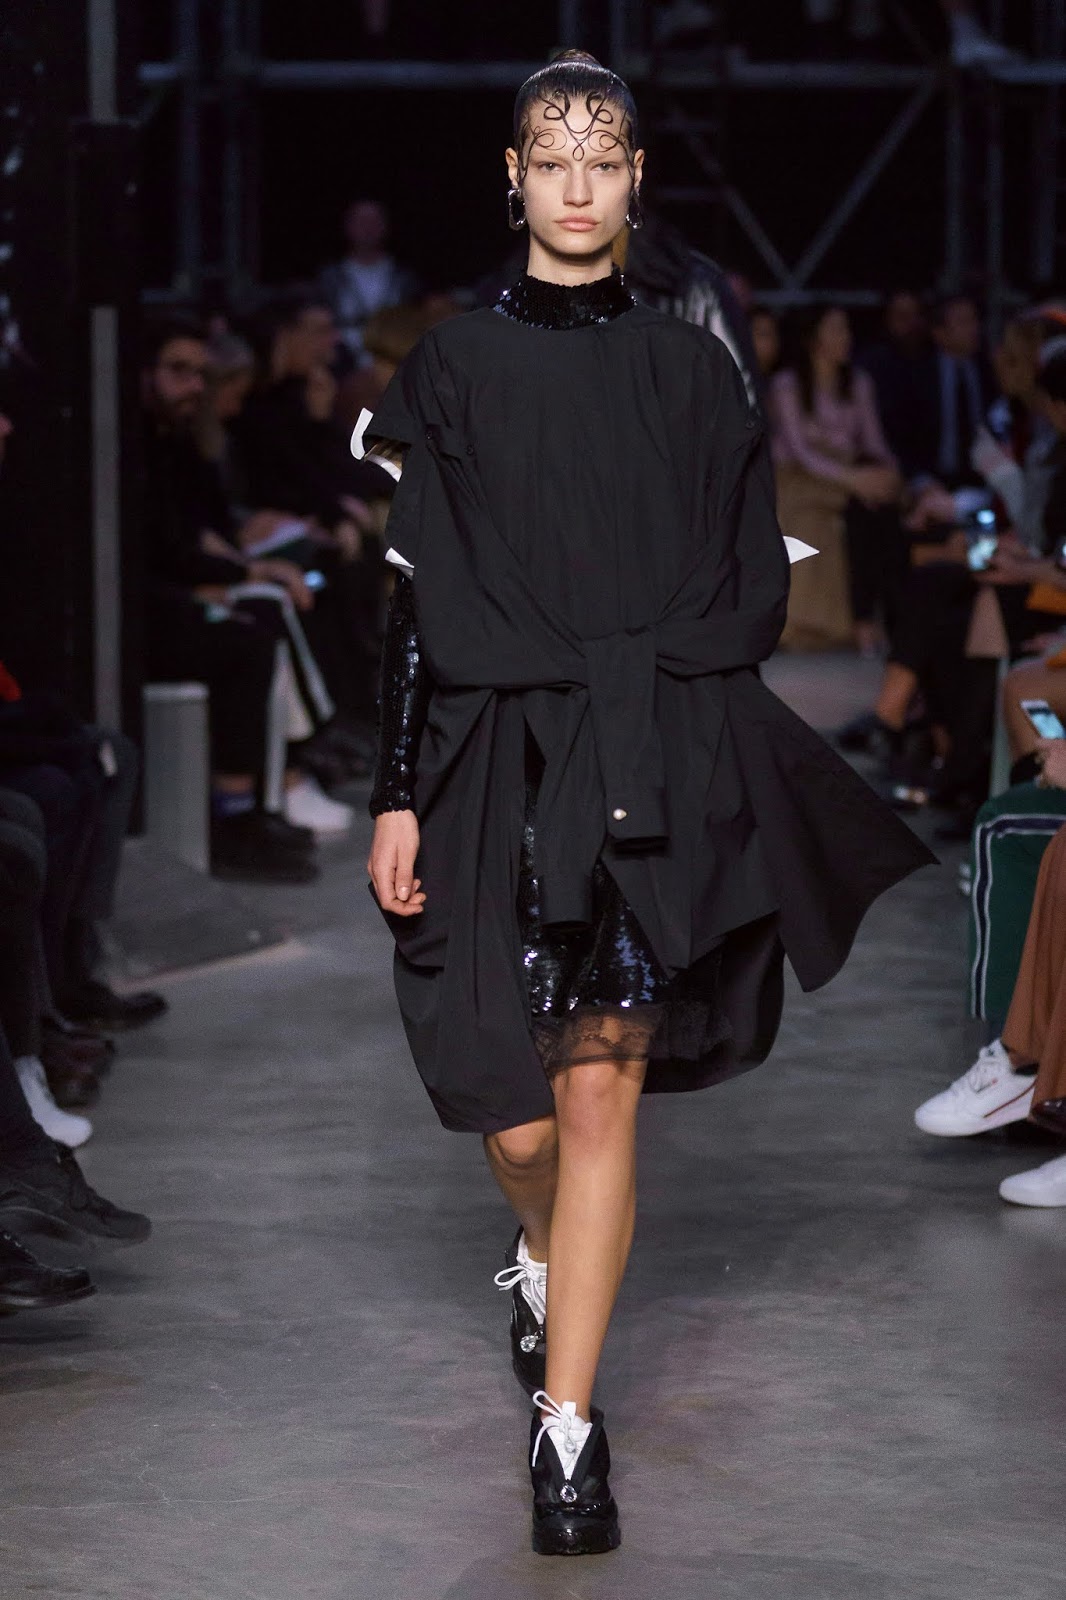 Runway Chic: BURBERRY May 11, 2019 | ZsaZsa Bellagio - Like No Other